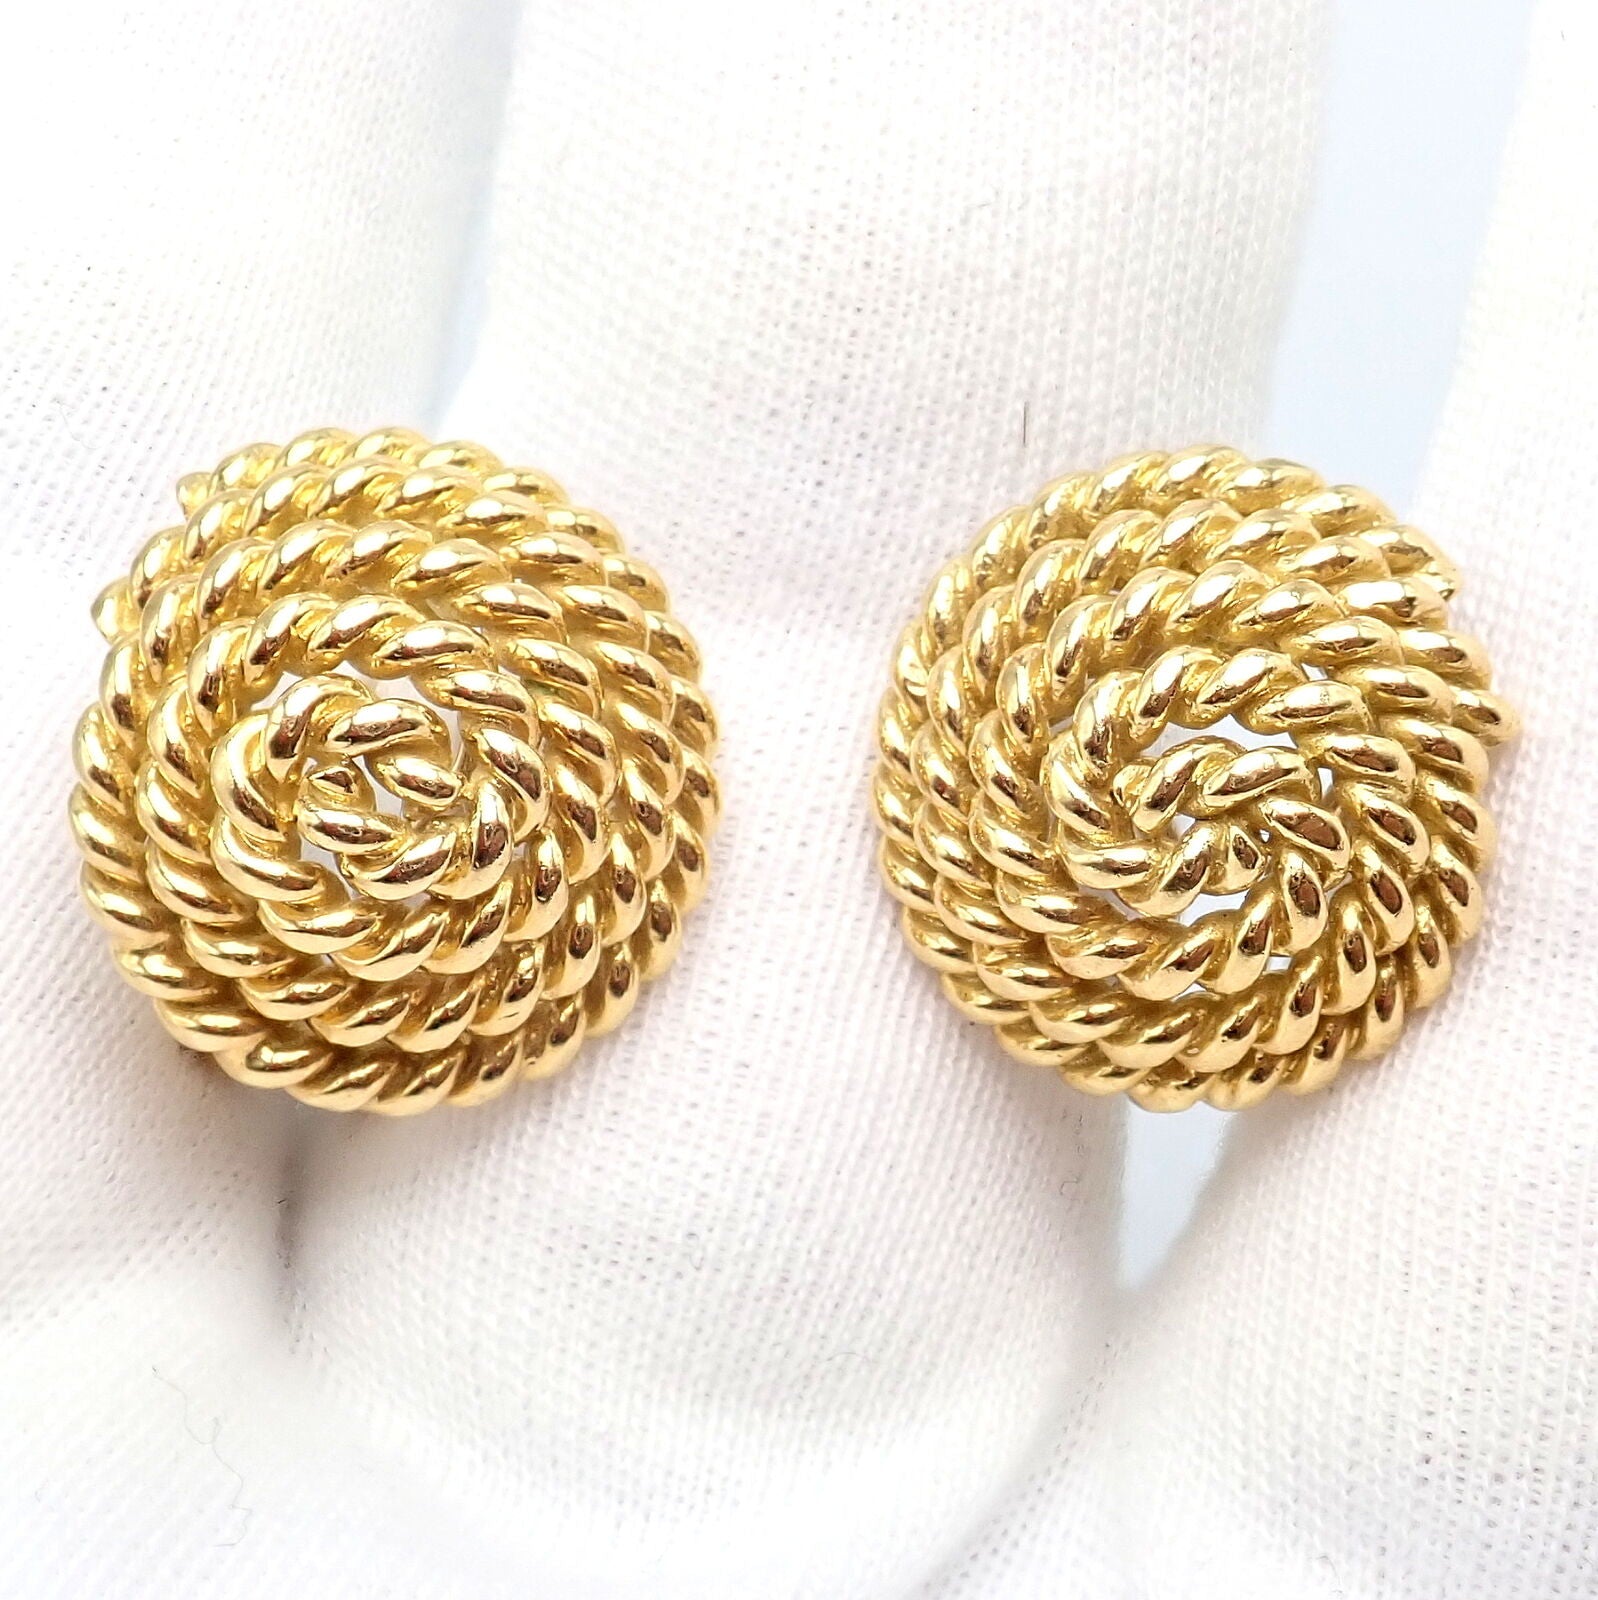 Tiffany & Co. Jewelry & Watches:Fine Jewelry:Earrings Rare! Authentic Vintage Tiffany & Co 18k Yellow Gold Large Coiled Rope Earrings